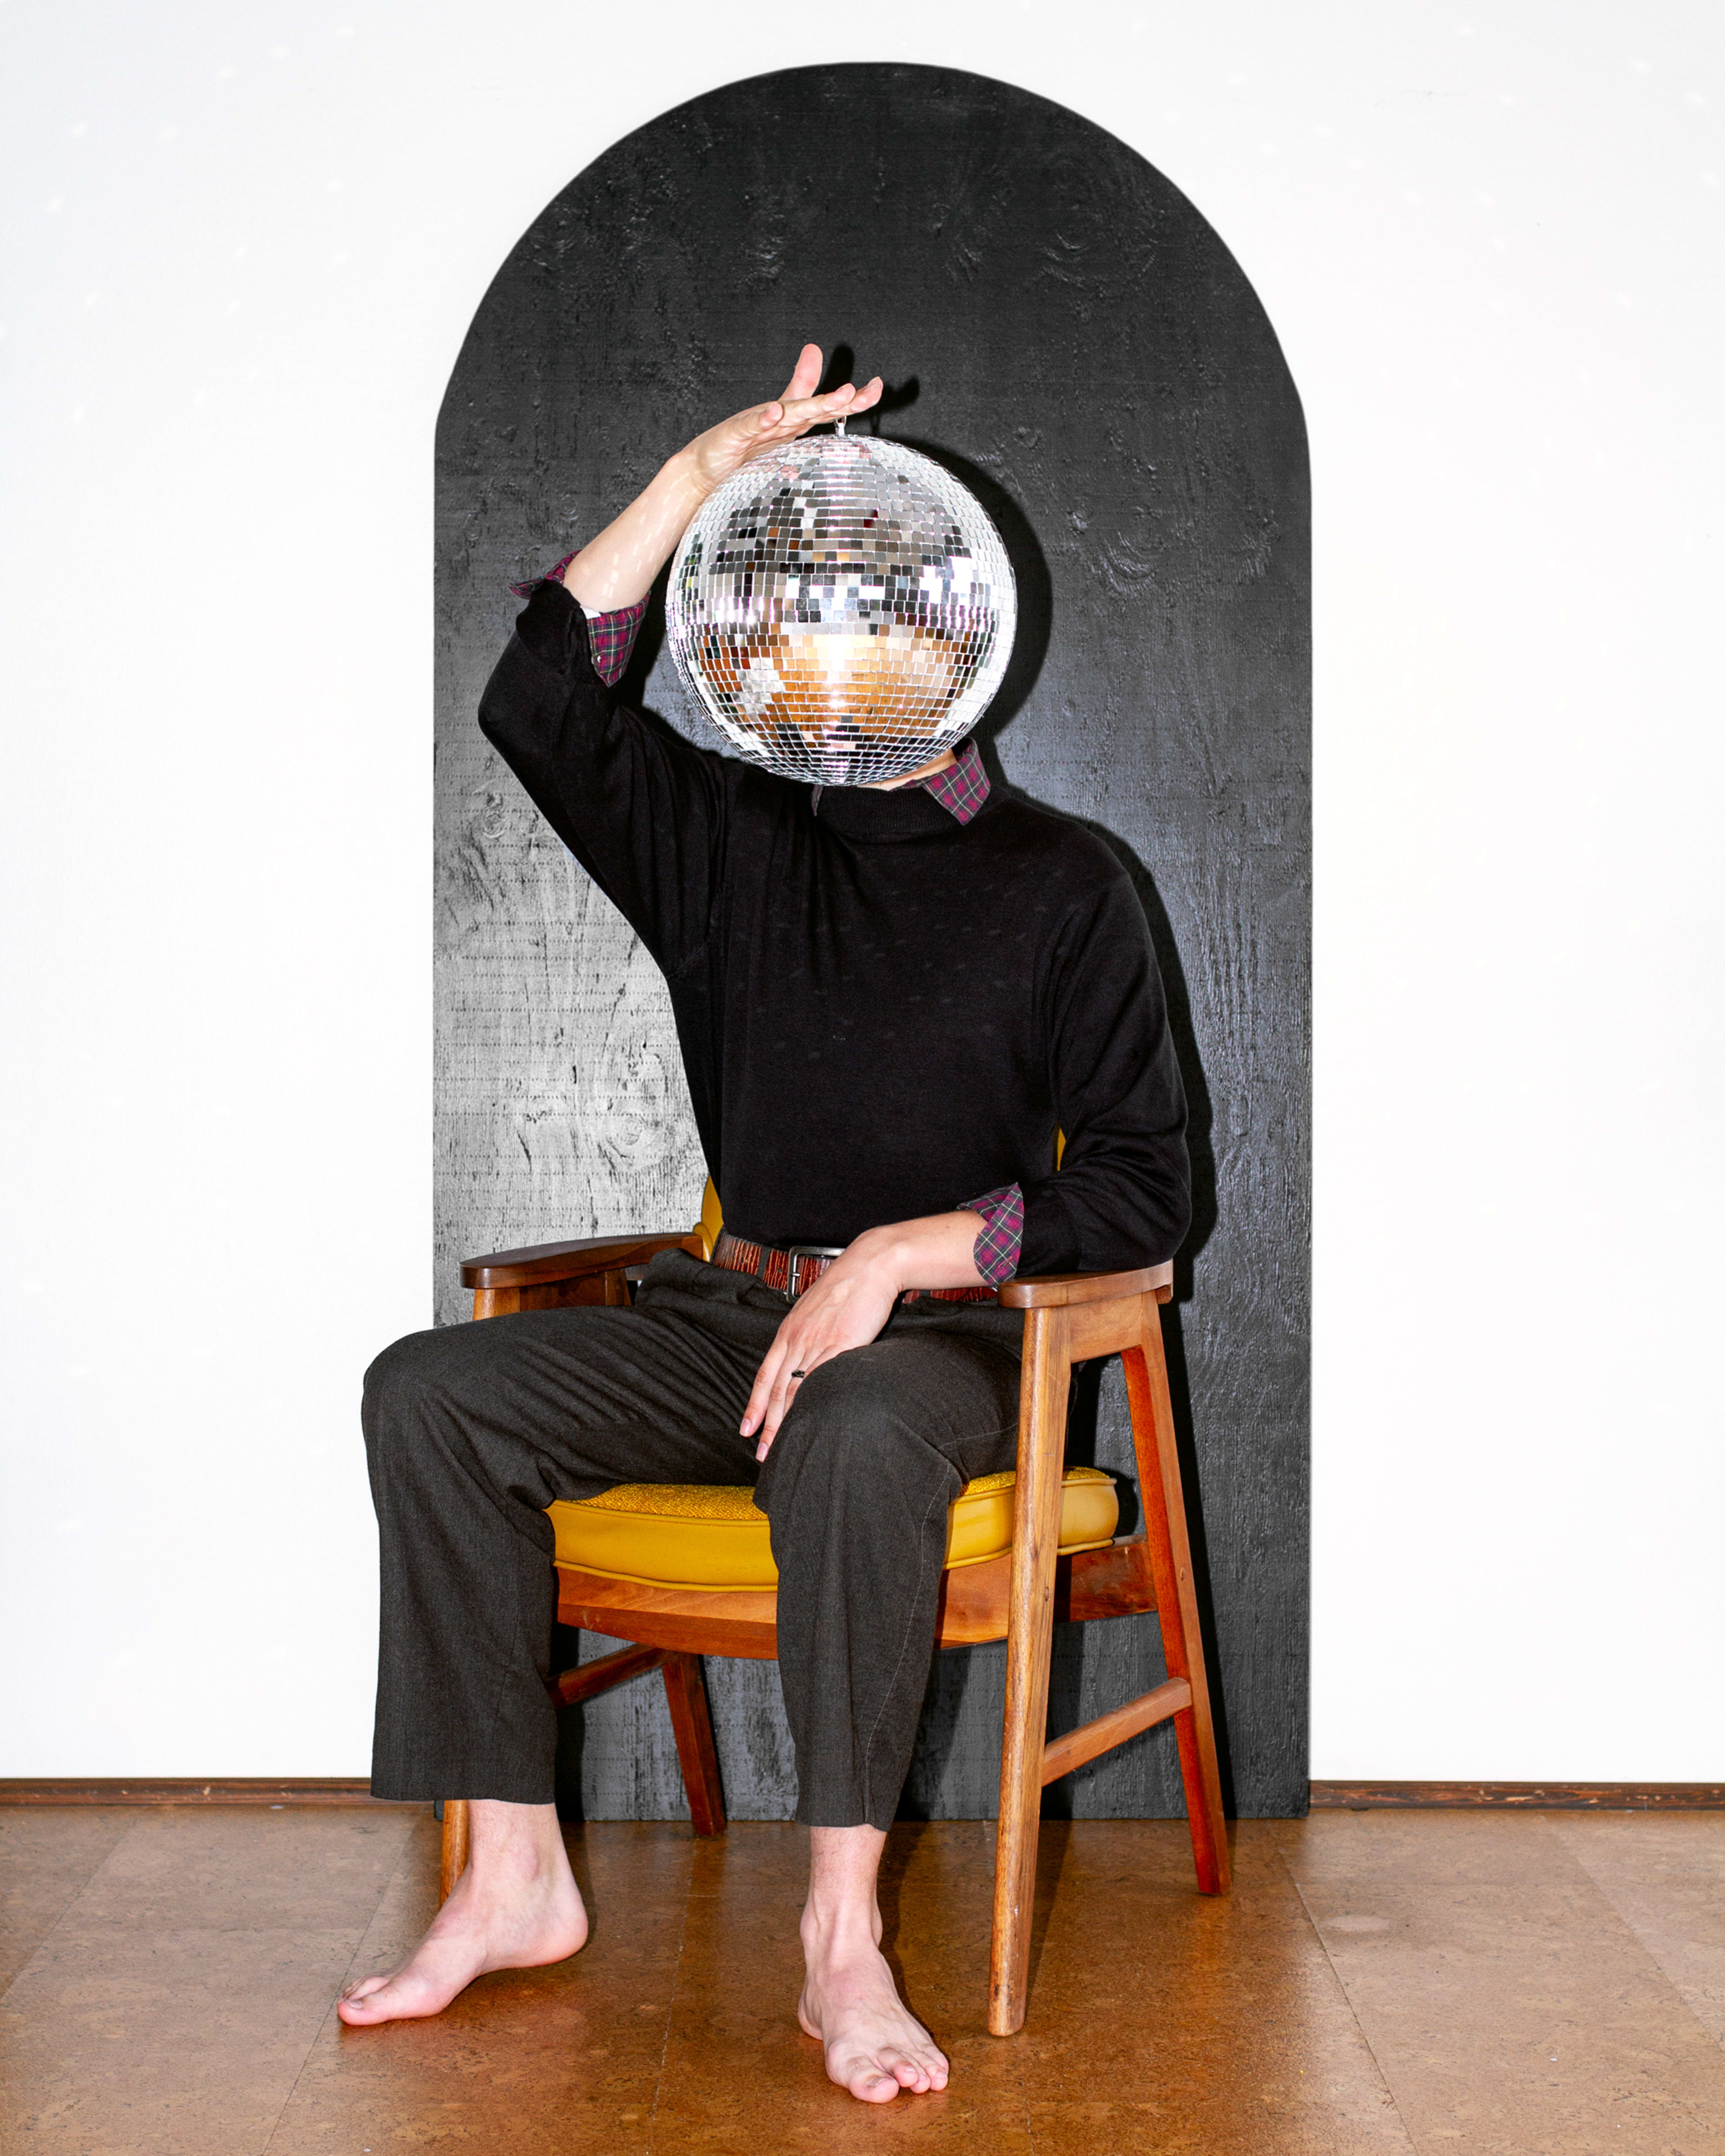 A fashion model posing for a photoshoot with a disco ball.